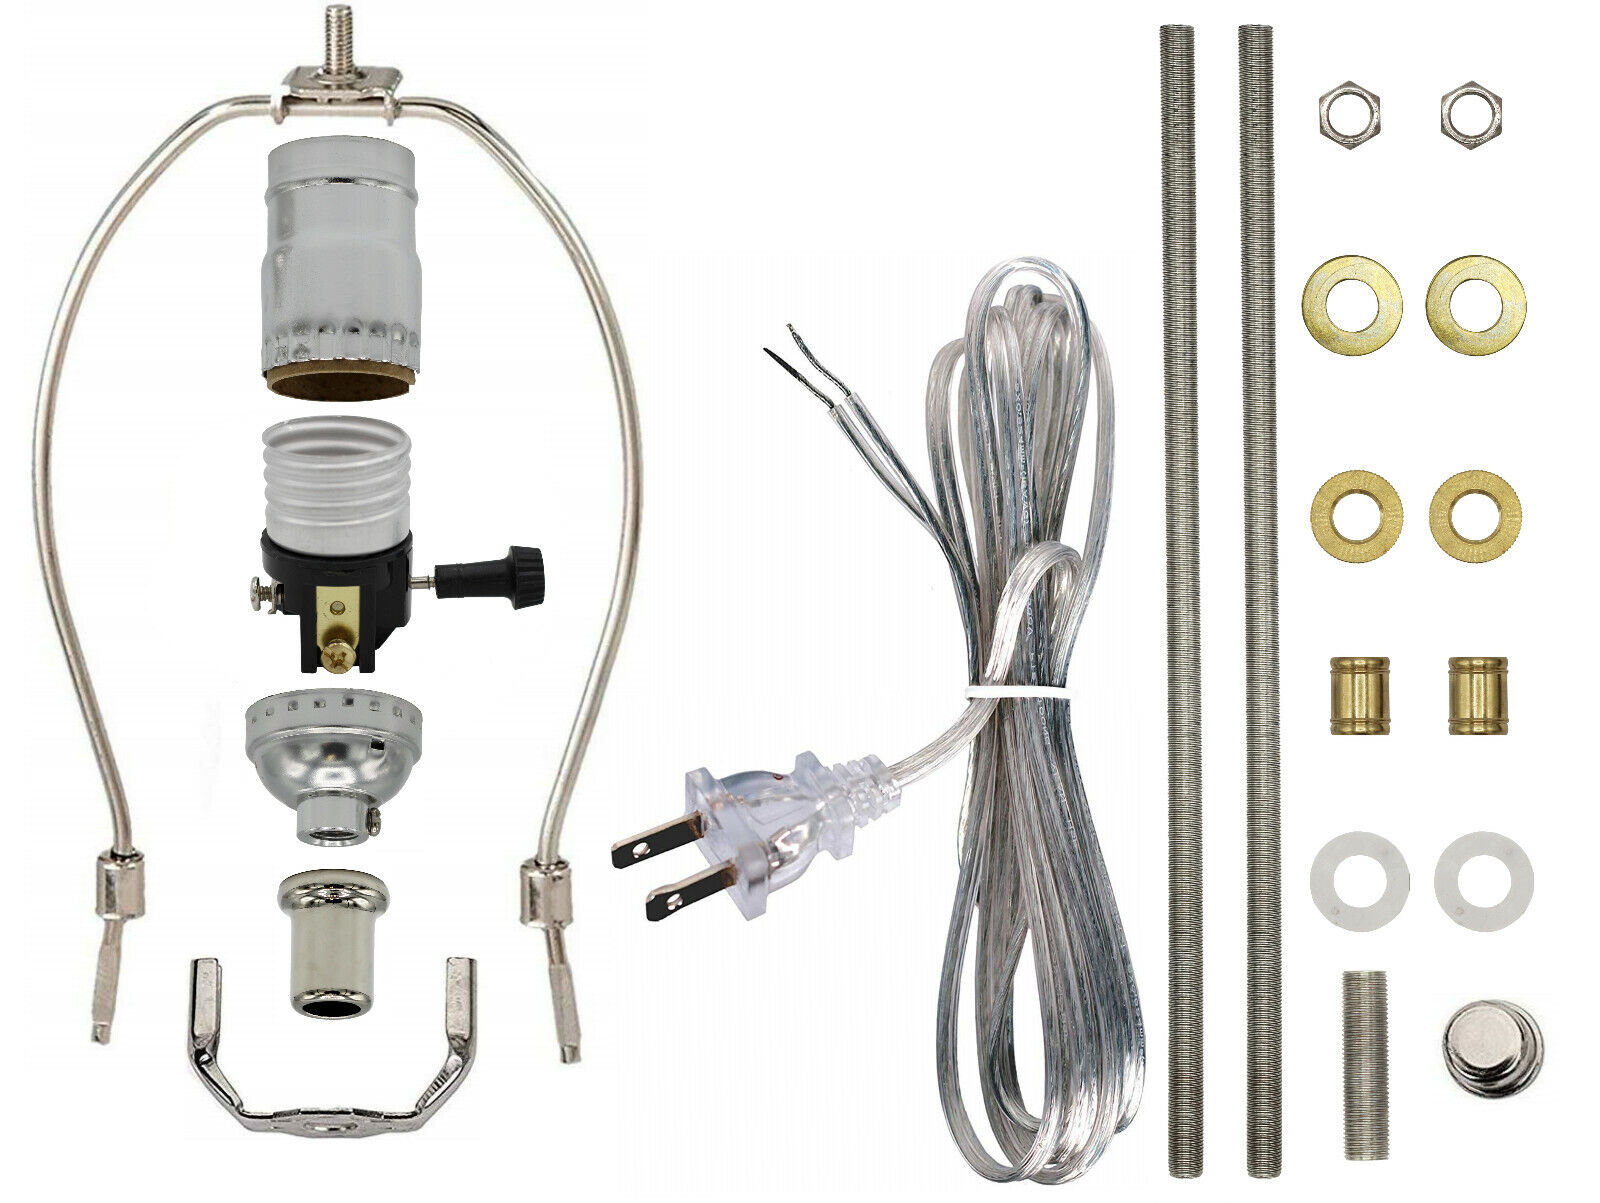 SIlver Make-A-Lamp Kit With All Parts & Instructions for DIY Lamp Repair